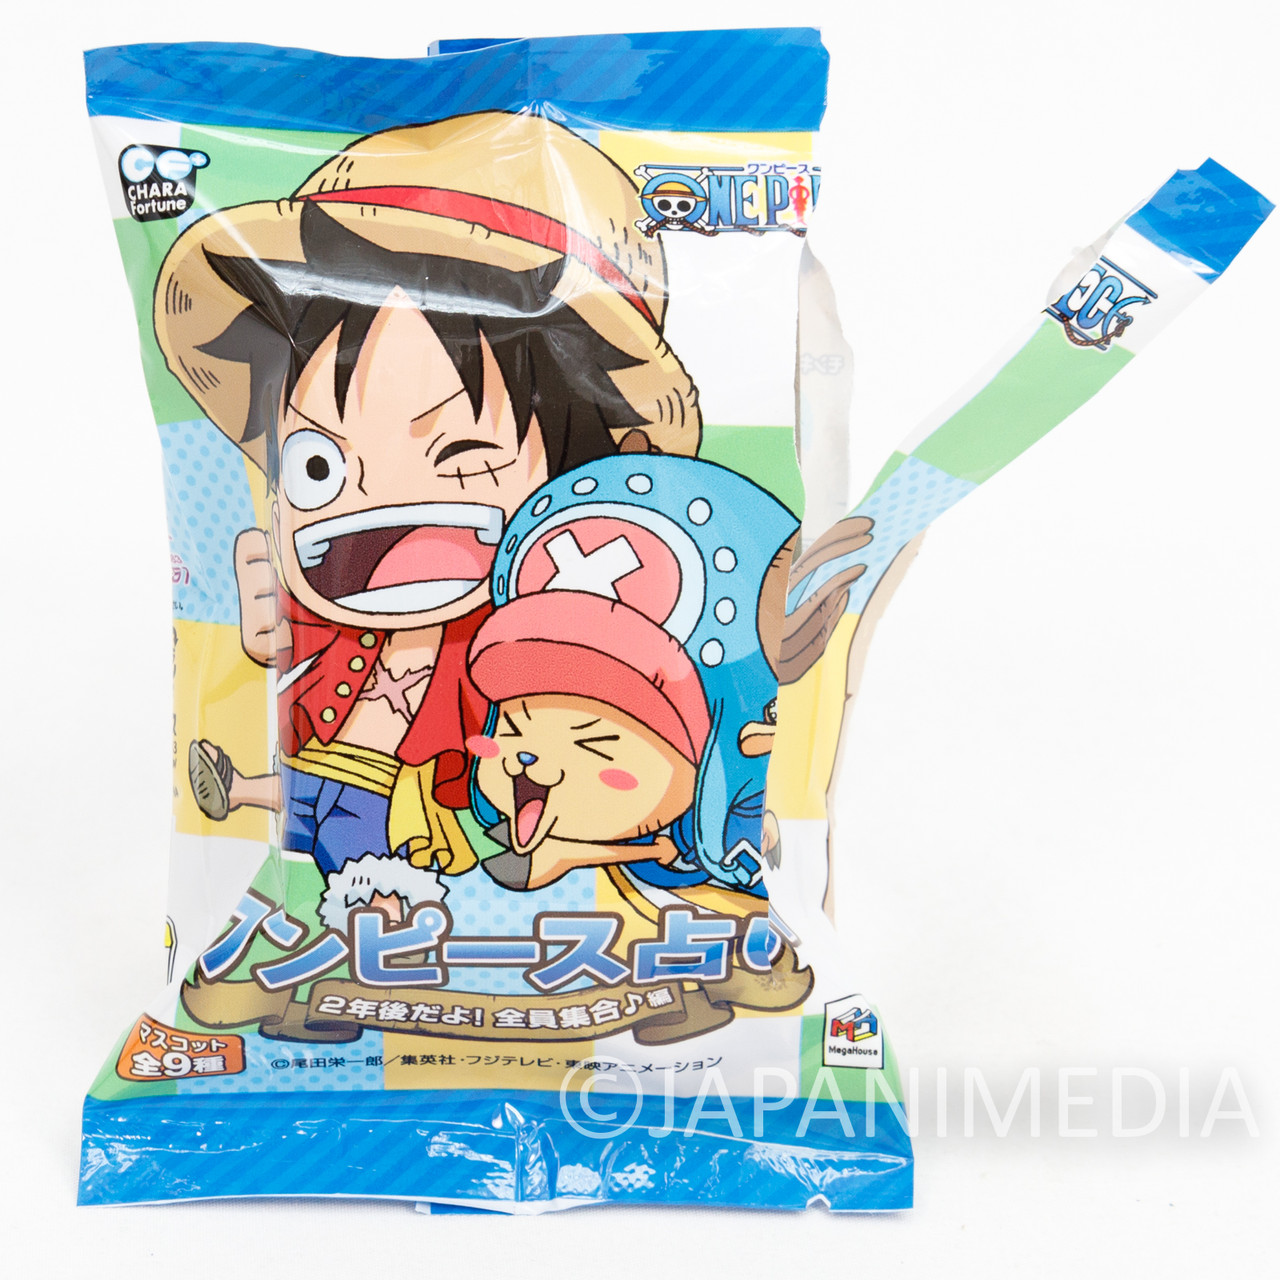 One Piece Monkey D. Luffy Mini Figure Chara Fortune Megahouse JAPAN ...